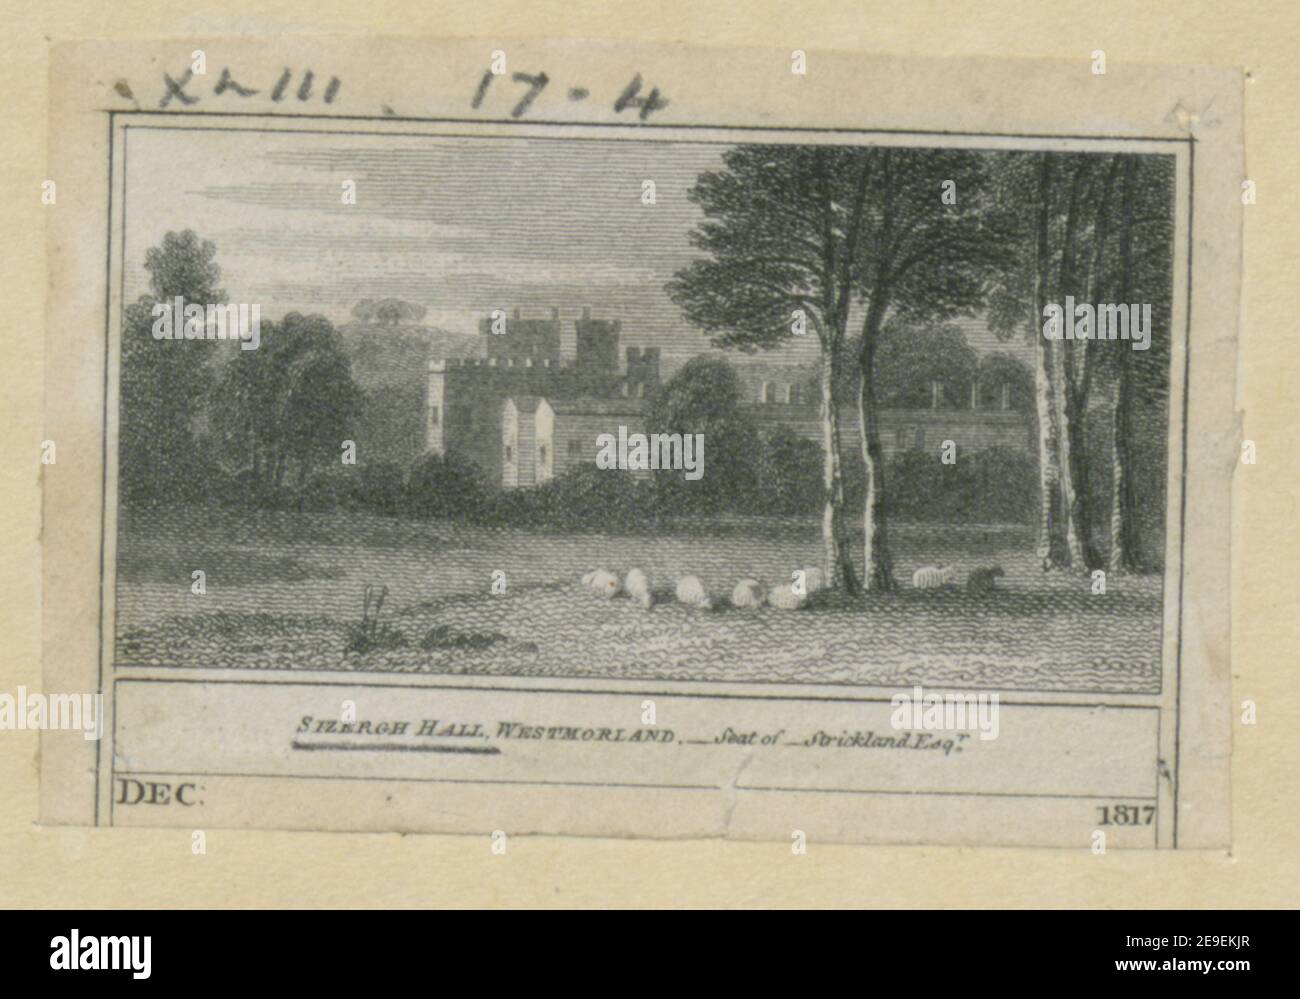 SIZERGH HALL, Westmorland.  Seat of   Strickland Esq.r Visual Material information:  Title: SIZERGH HALL, Westmorland. -Seat of - Strickland Esq.r 43.17.4. Date of publication: 1817.  Item type: 1 print Medium: etching Dimensions: sheet 4.3 x 6.4 cm (trimmed within platemark)  Former owner: George III, King of Great Britain, 1738-1820 Stock Photo